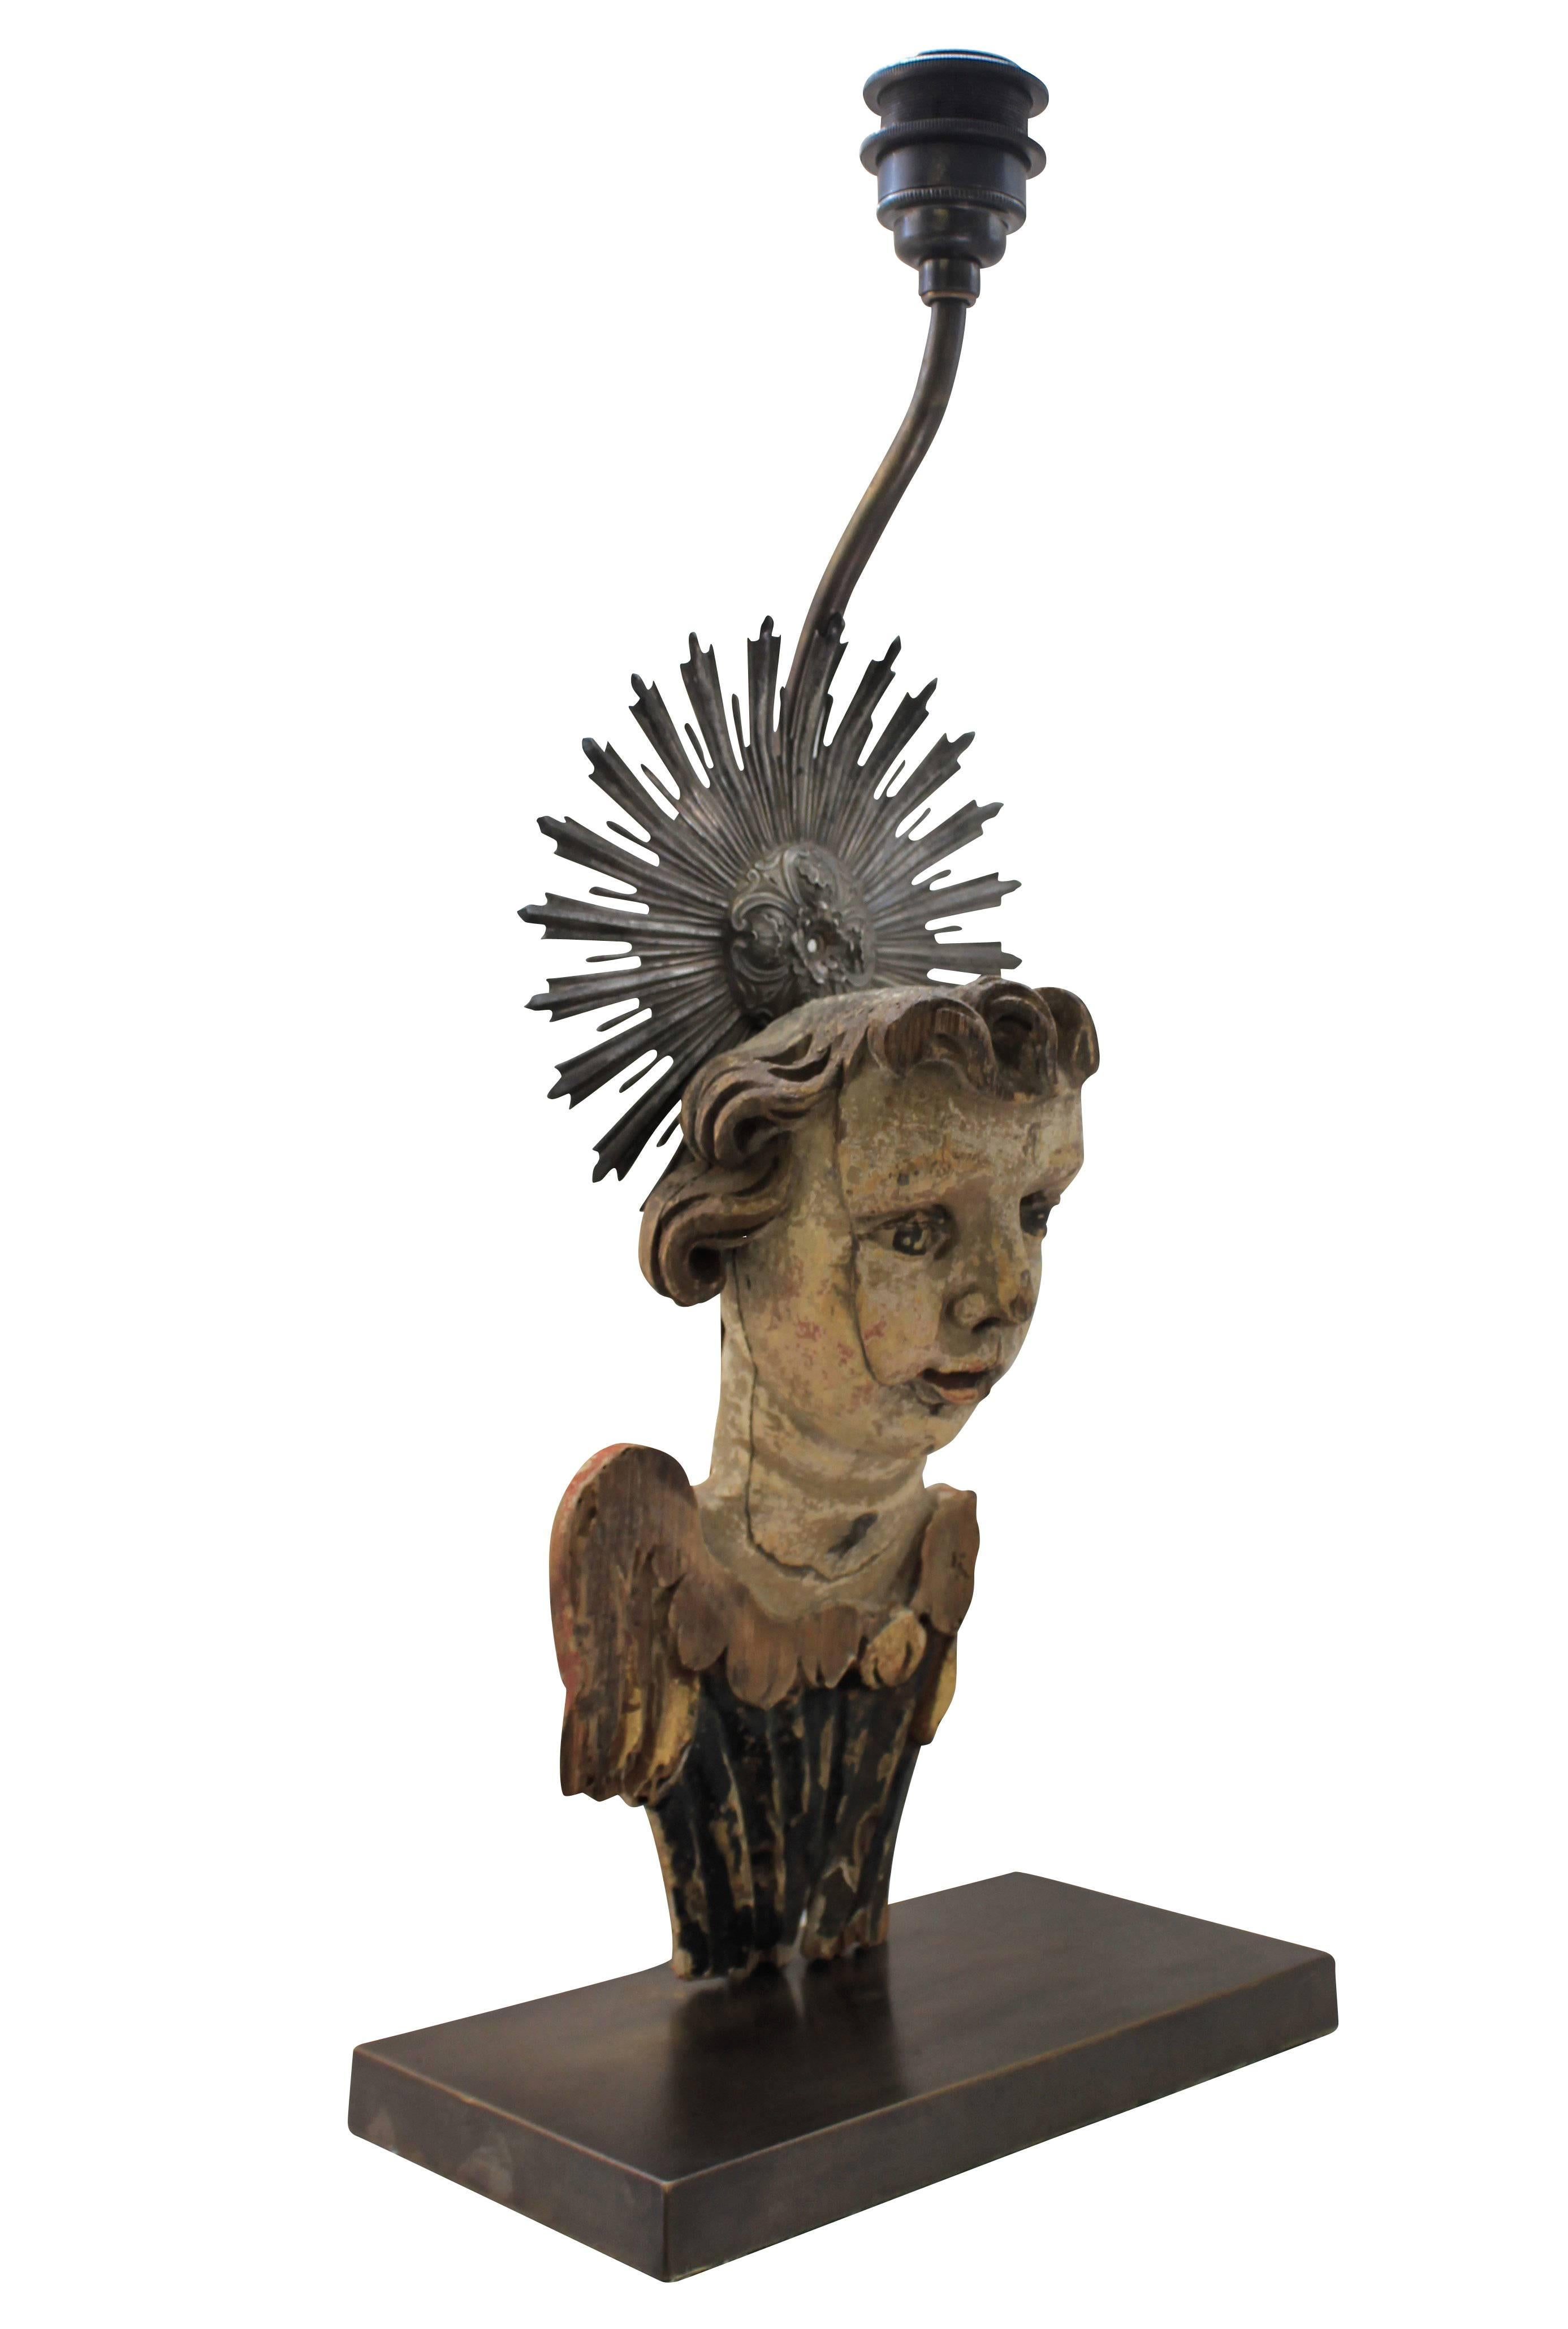 An Italian 18th century carved angel fragment with a silver nimbus, mounted as a lamp.